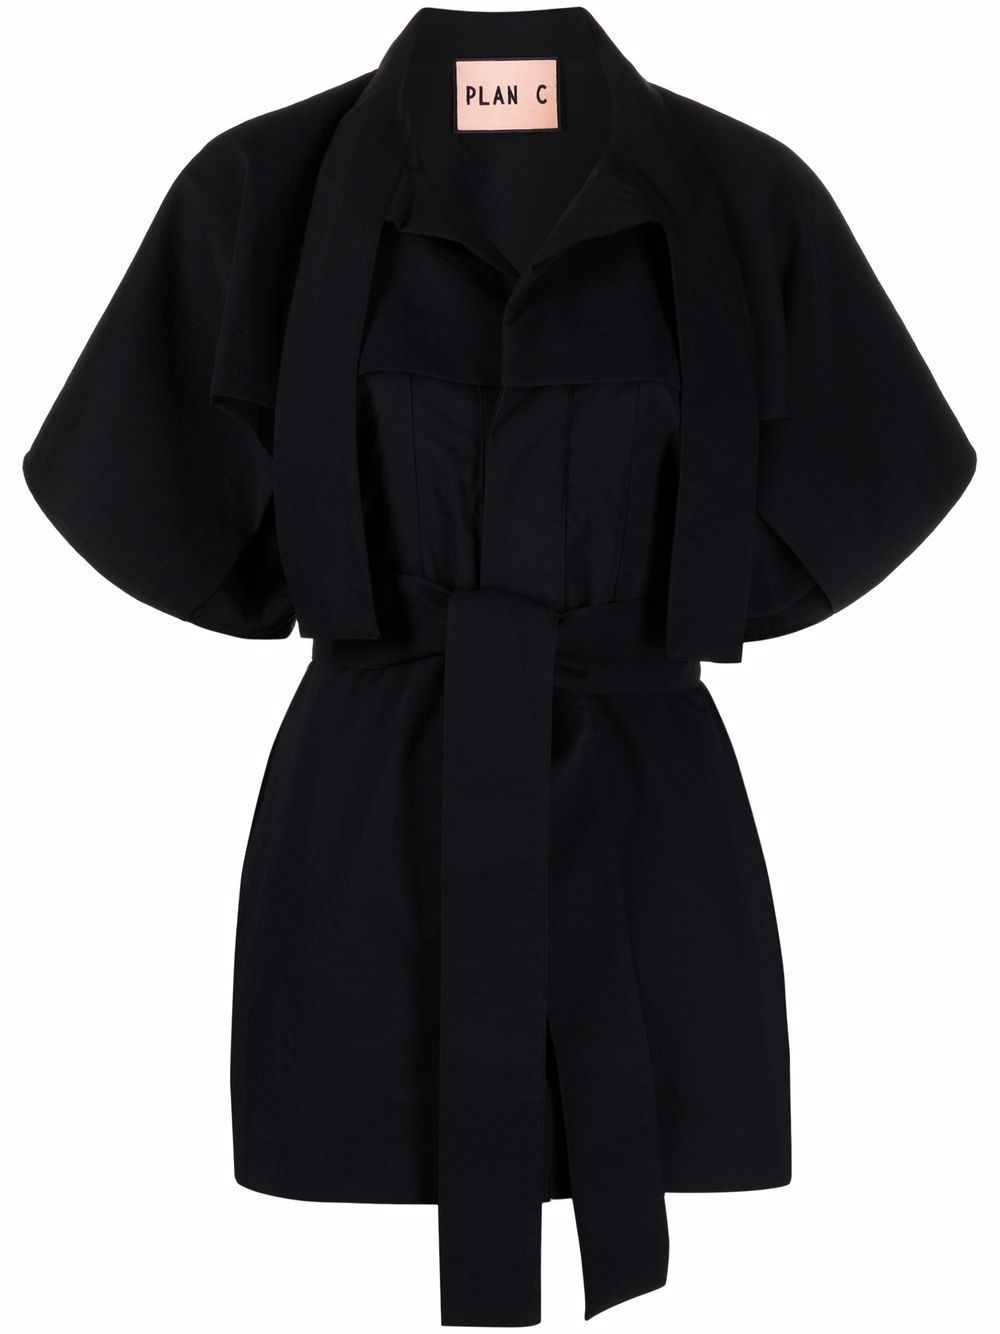 Shop Plan C front-cape tunic blouse with Express Delivery - FARFETCH